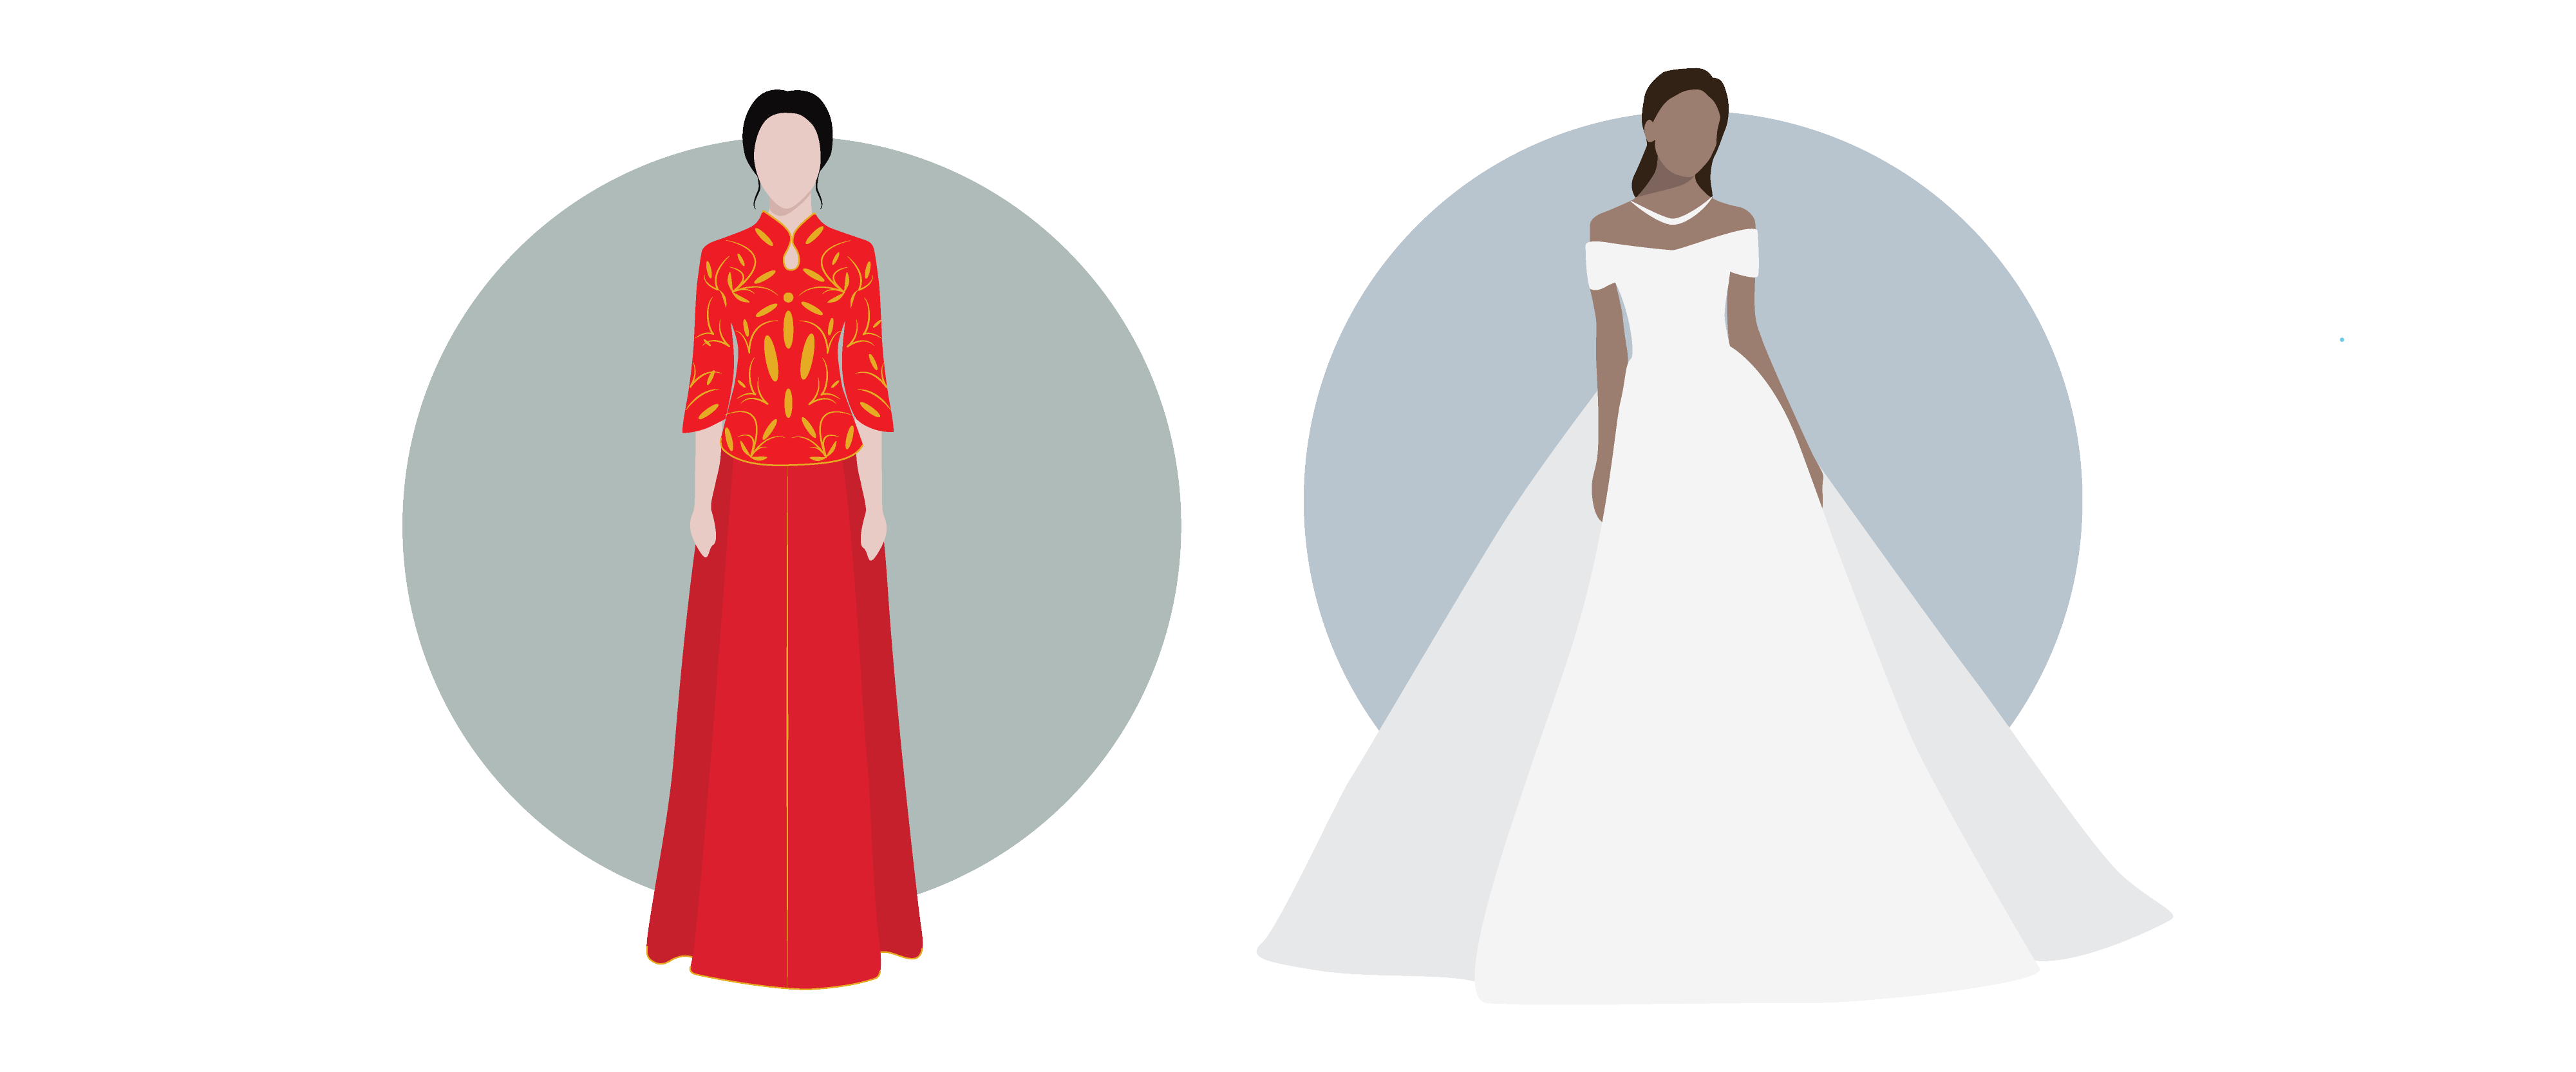 To the left is a person in a red wedding dress. To the right is a person in a white wedding dress.